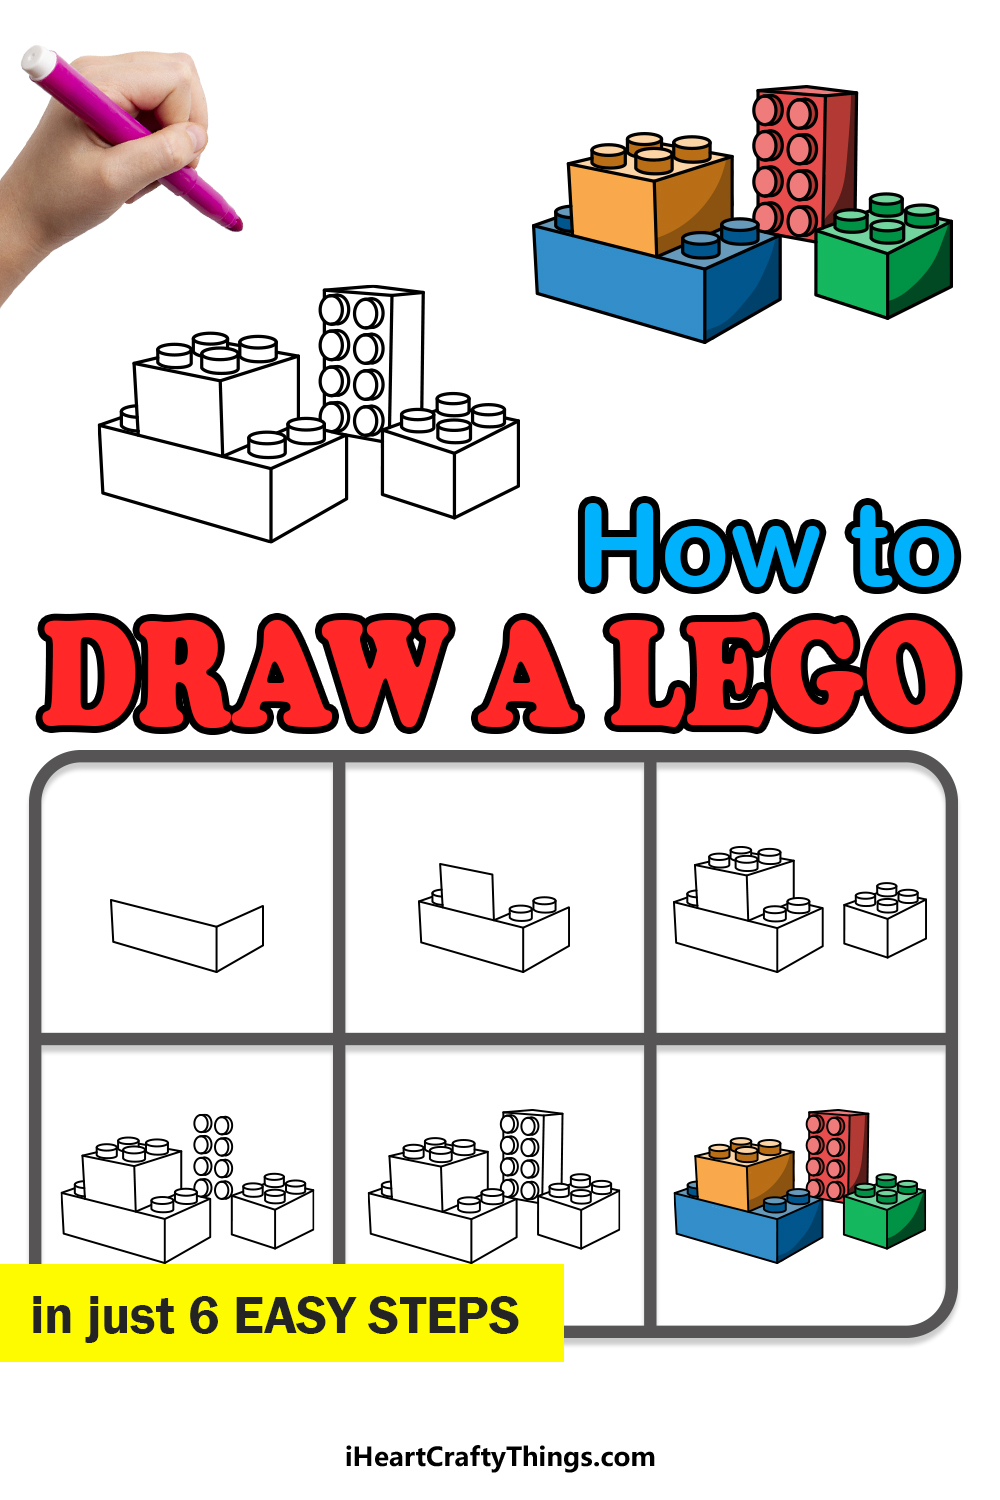 how to draw Lego in 6 easy steps